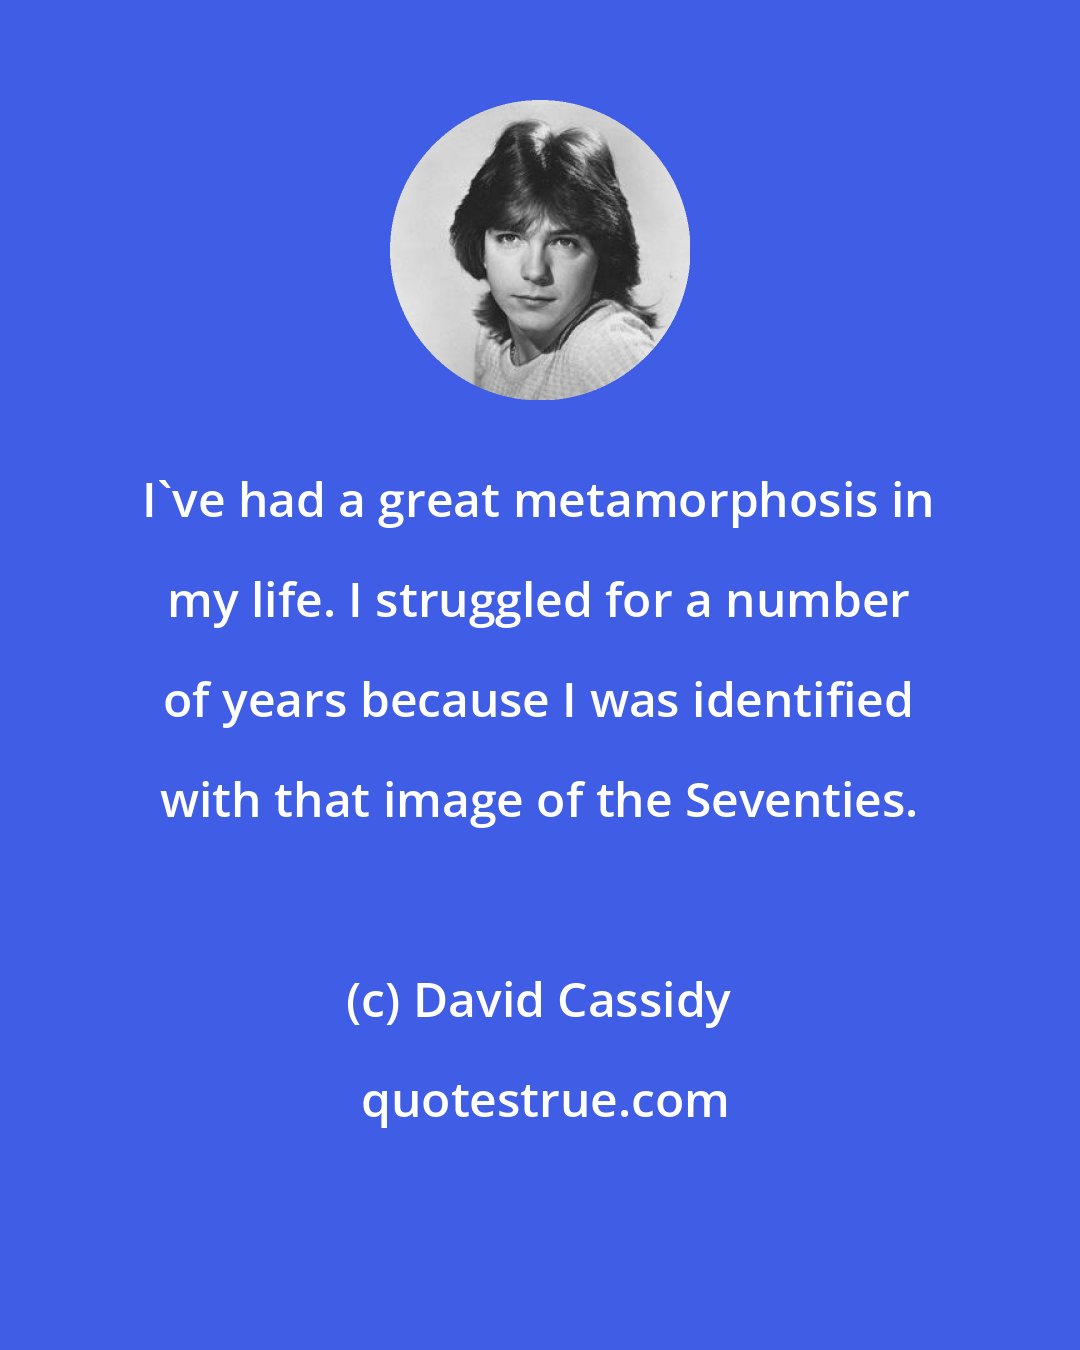 David Cassidy: I've had a great metamorphosis in my life. I struggled for a number of years because I was identified with that image of the Seventies.